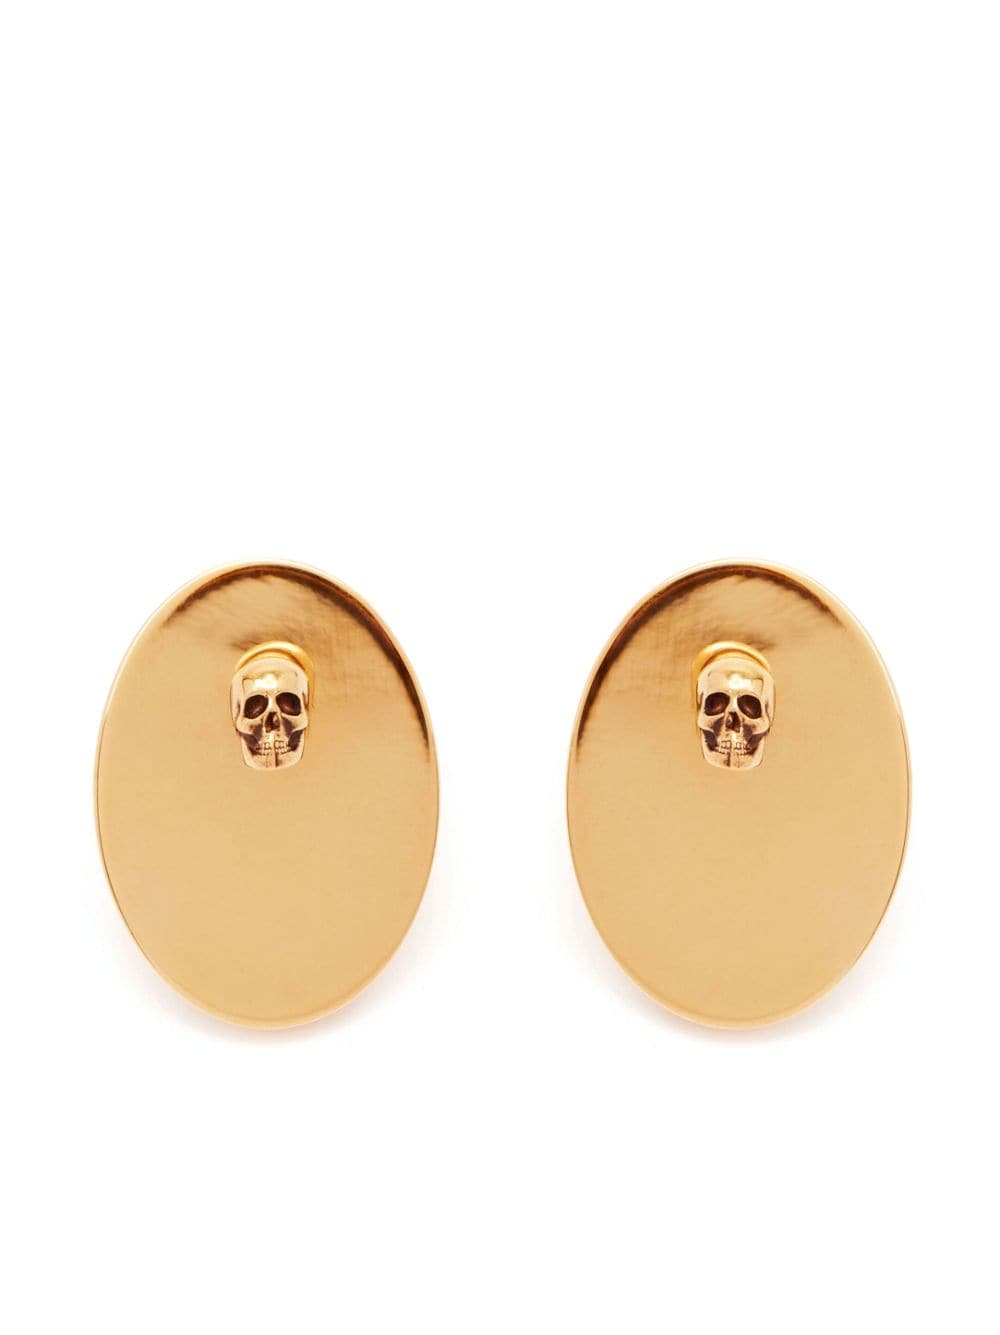 The Faceted Stone Stud Earrings